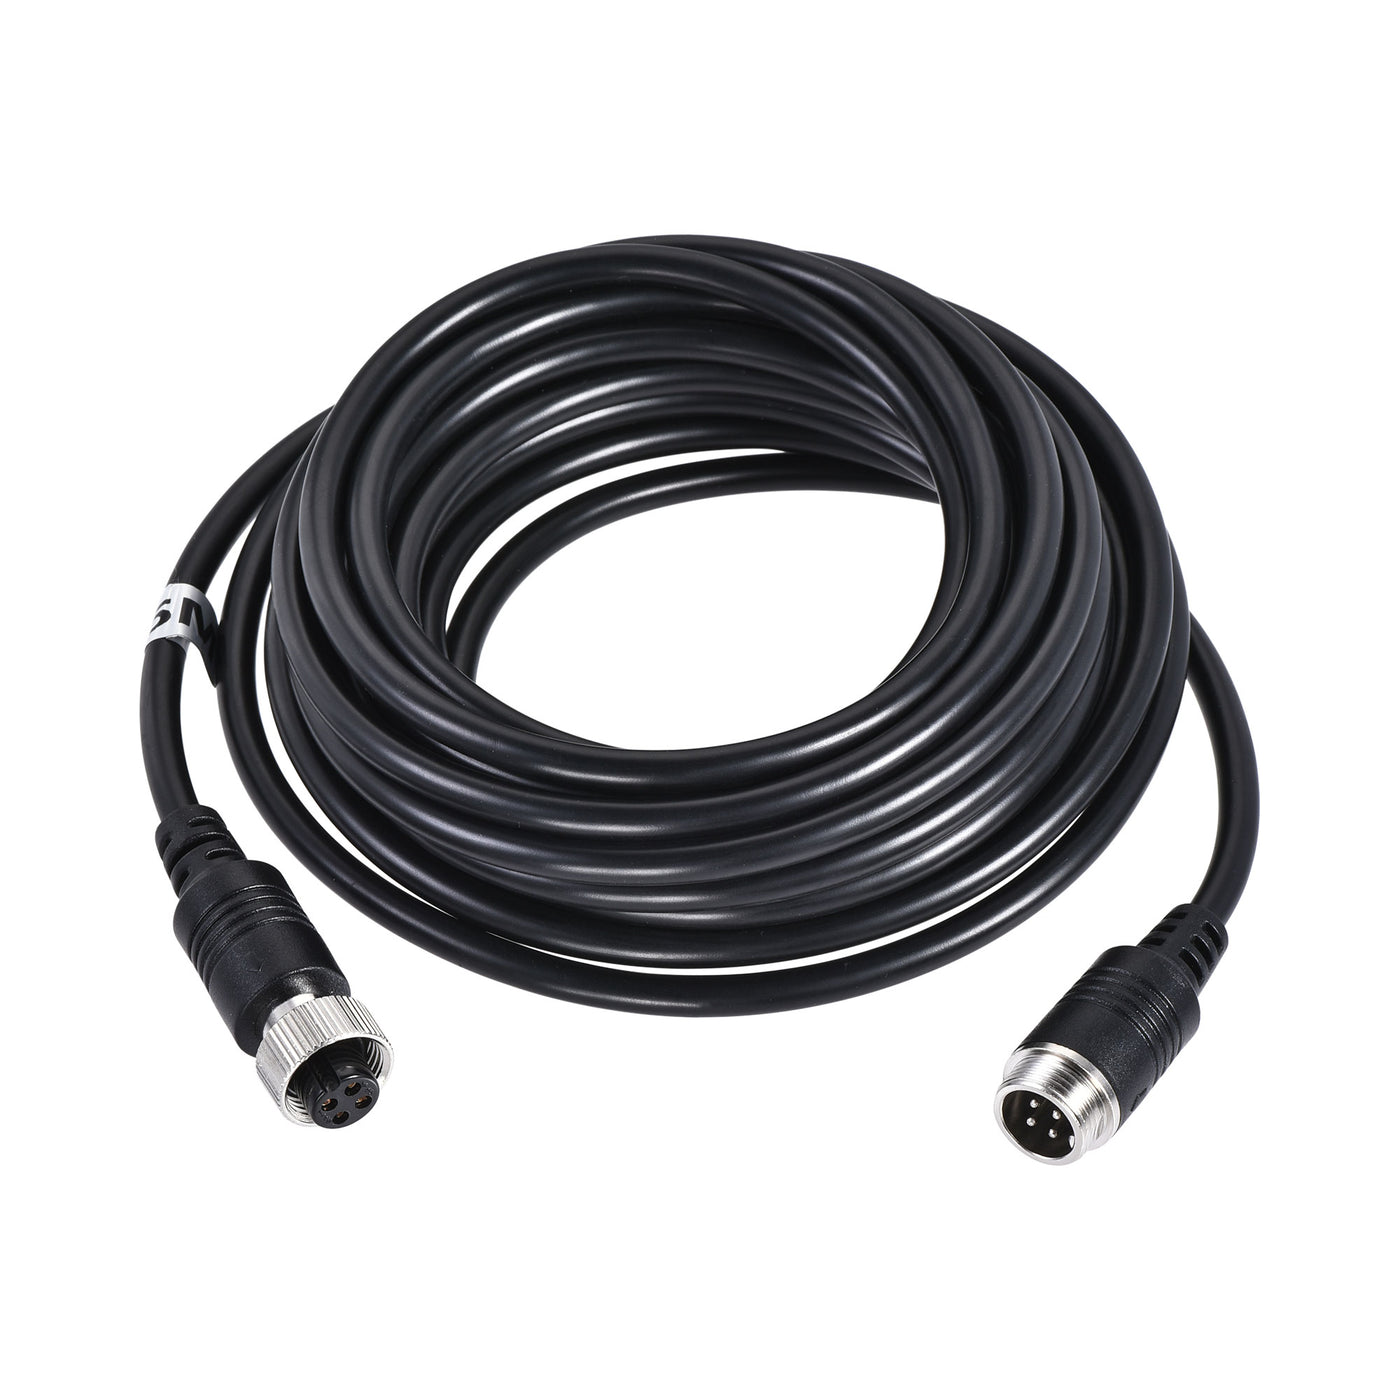 Uxcell Uxcell Video Aviation Cable 4-Pin 22.97FT 7M Male to Female Shielded Extension Cable